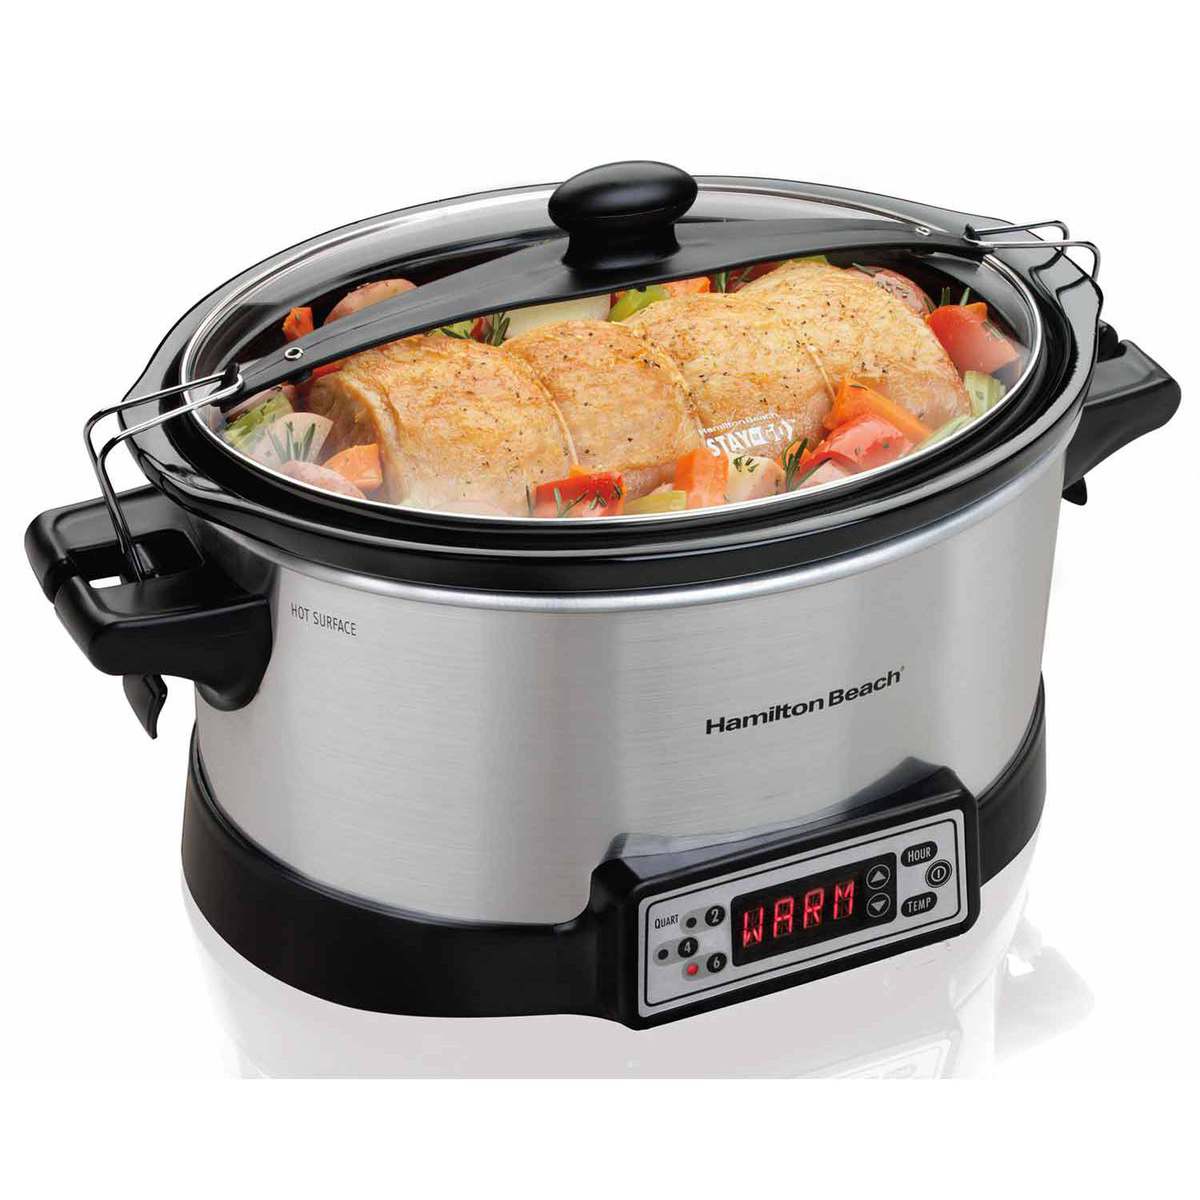 Programmable Right Size™ Multi-Quart Slow Cooker (33642)